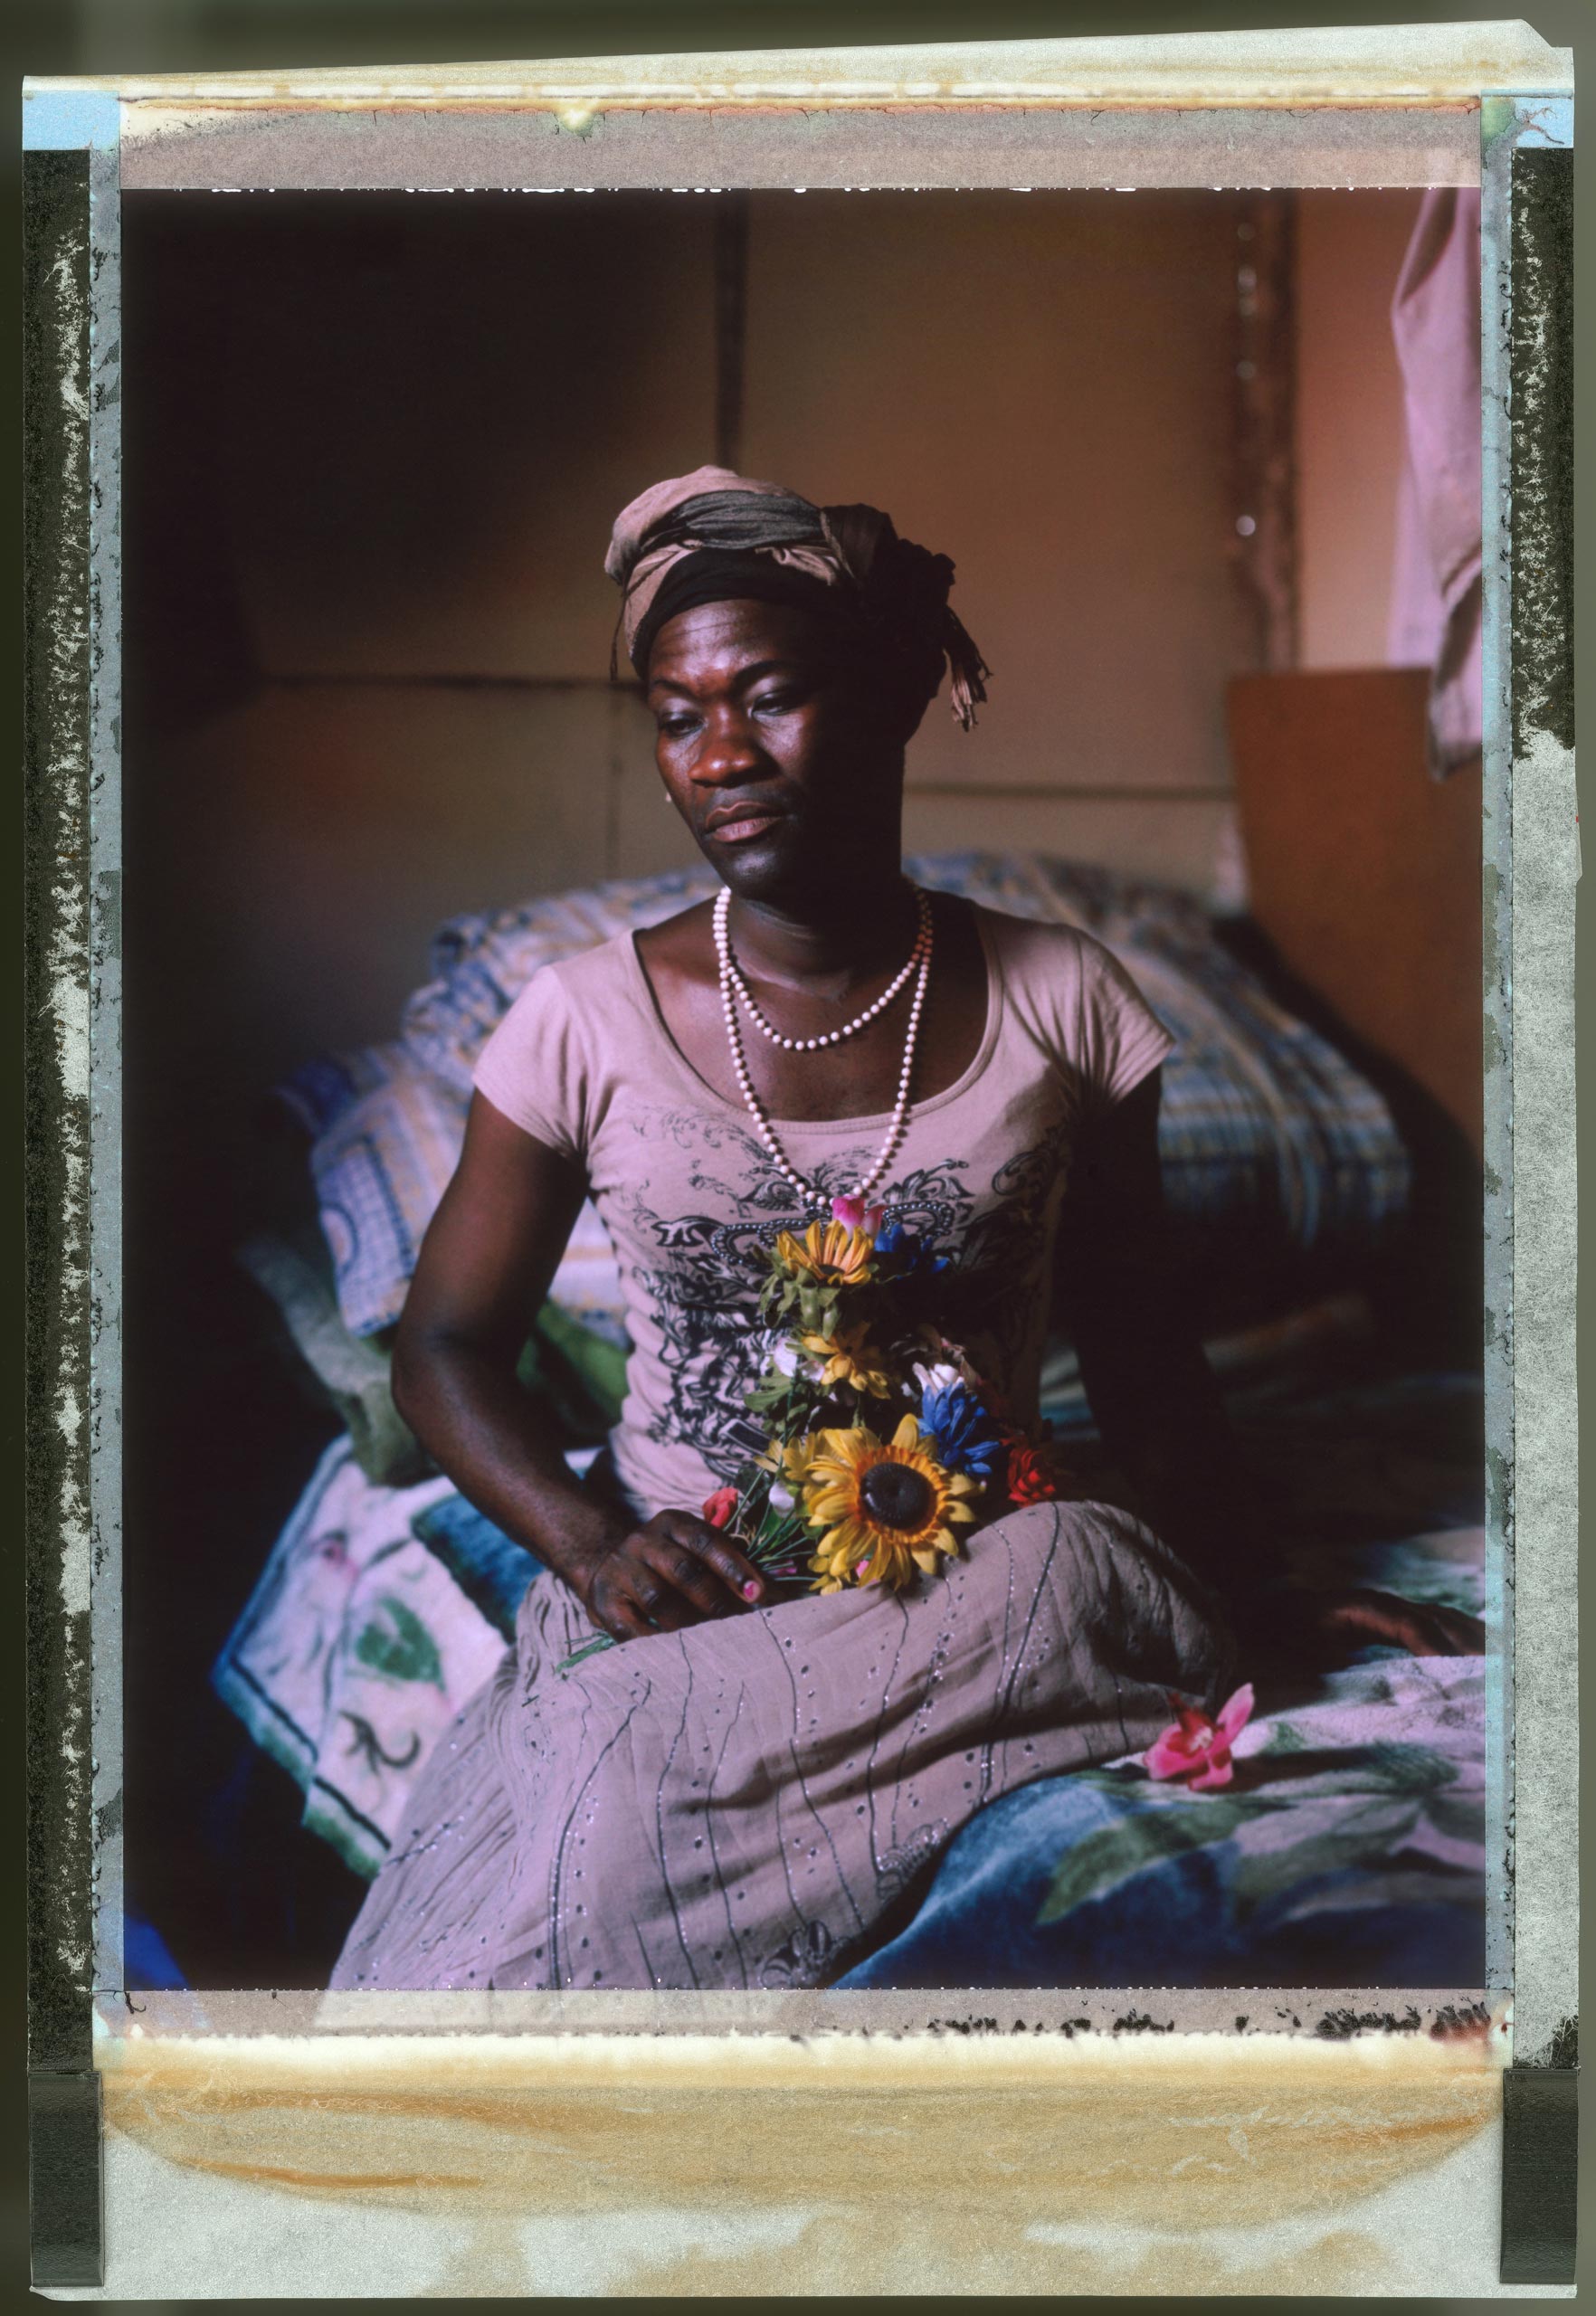 A posed portrait of Tiwonge Chimbalanga from Malawi. In 2009 Steven Monjeza Soko and Tiwonge Chimbalanga were arrested in their home country of Malawi and in 2010 they were both charged with buggery and permitting buggery, as well as with the offence of indecent practices between males in accordance with sections 153 and 156 of the Malawian Penal Code. Convicted, the two men were sentenced to the maximum penalty of fourteen years. According to the sentencing magistrate, the severity of the sentence was justified to protect Malawian society: “I will give you a scaring sentence so that the public be protected from people like you, so that we are not tempted to emulate this horrendous example.” This judgement took place in spite of Malawi’s own constitution and it being a signatory state to a number of human rights treaties. Consequently, the case attracted an international outcry and both men were later pardoned on condition that they do not have any future contact with each other. Following release, fearing for her safety, Tiwonge fled to South Africa. November 2014.  While many countries around the world are legally recognizing same-sex relationships, individuals in nearly 80 countries face criminal sanctions for private consensual relations with another adult of the same sex. Violence and discrimination based on sexual orientation or gender expression is even more widespread. Africa is becoming the worst continent for Lesbian, Gay, Bi-sexual, Transgender, Queer, Inter-sex (LGBTQI) individuals. More than two thirds of African countries have laws criminalizing consensual same-sex acts. In some, homosexuality is punishable by death. In Nigeria new homophobic laws introduced in 2013 led to dramatic increase in attacks. Under Sharia Law, homosexuality is punishable by death, up to 50 lashes and six months in prison for woman; for men elsewhere, up to 14 years in prison. Same sex acts are illegal in Uganda. A discriminatory law was passed then struck down and homop